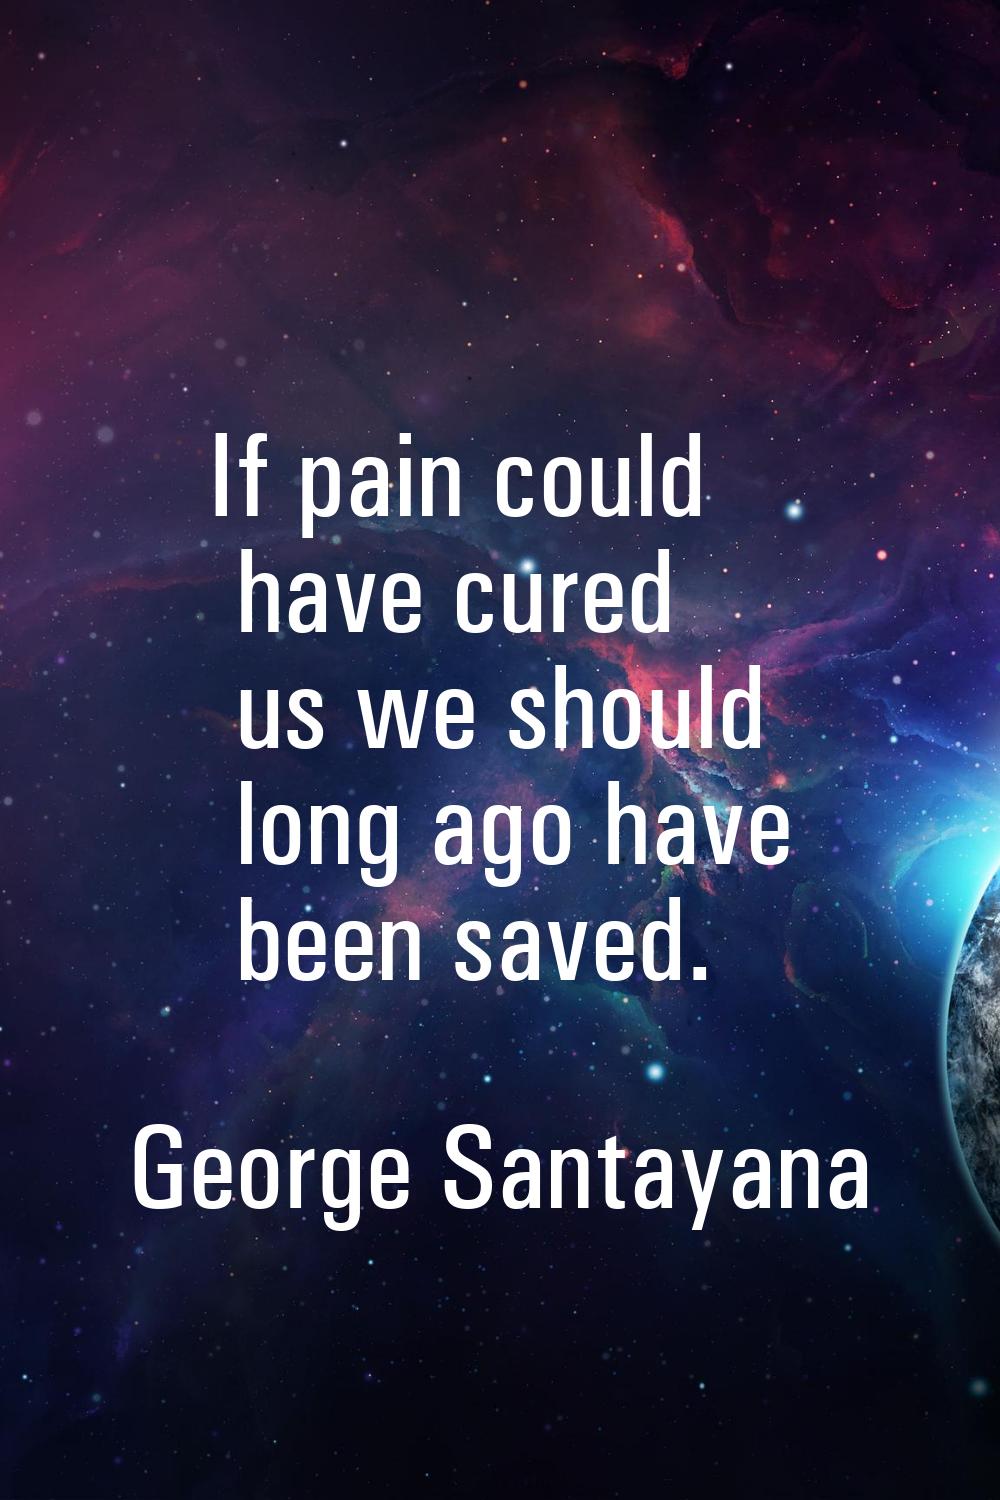 If pain could have cured us we should long ago have been saved.